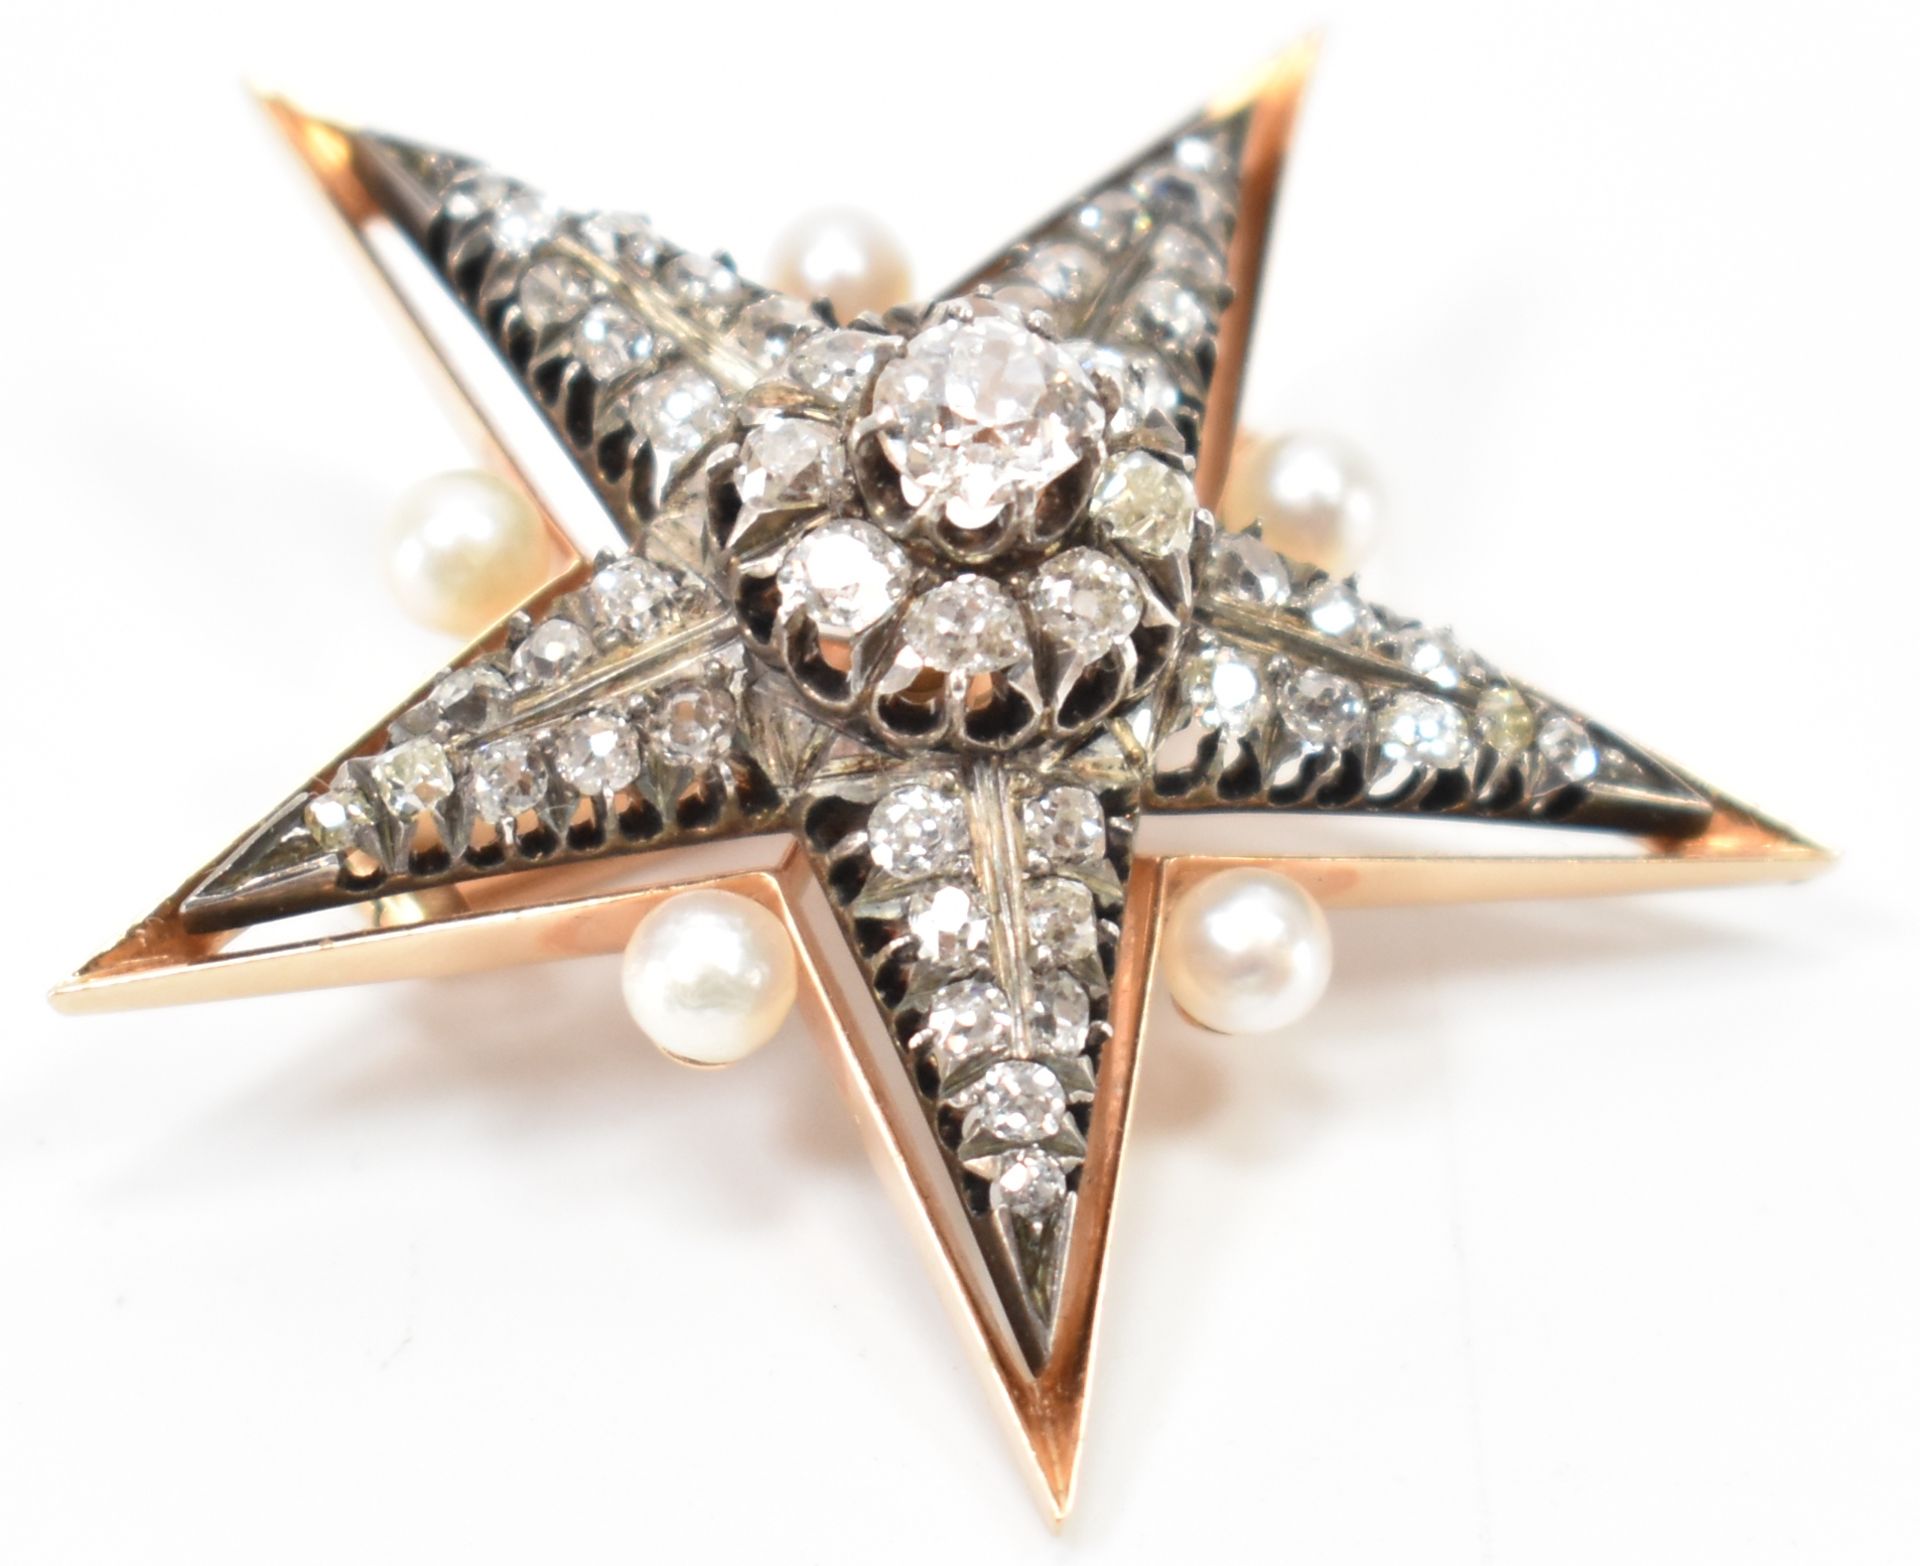 EARLY 20TH CENTURY DIAMOND & PEARL STAR BROOCH - Image 3 of 6